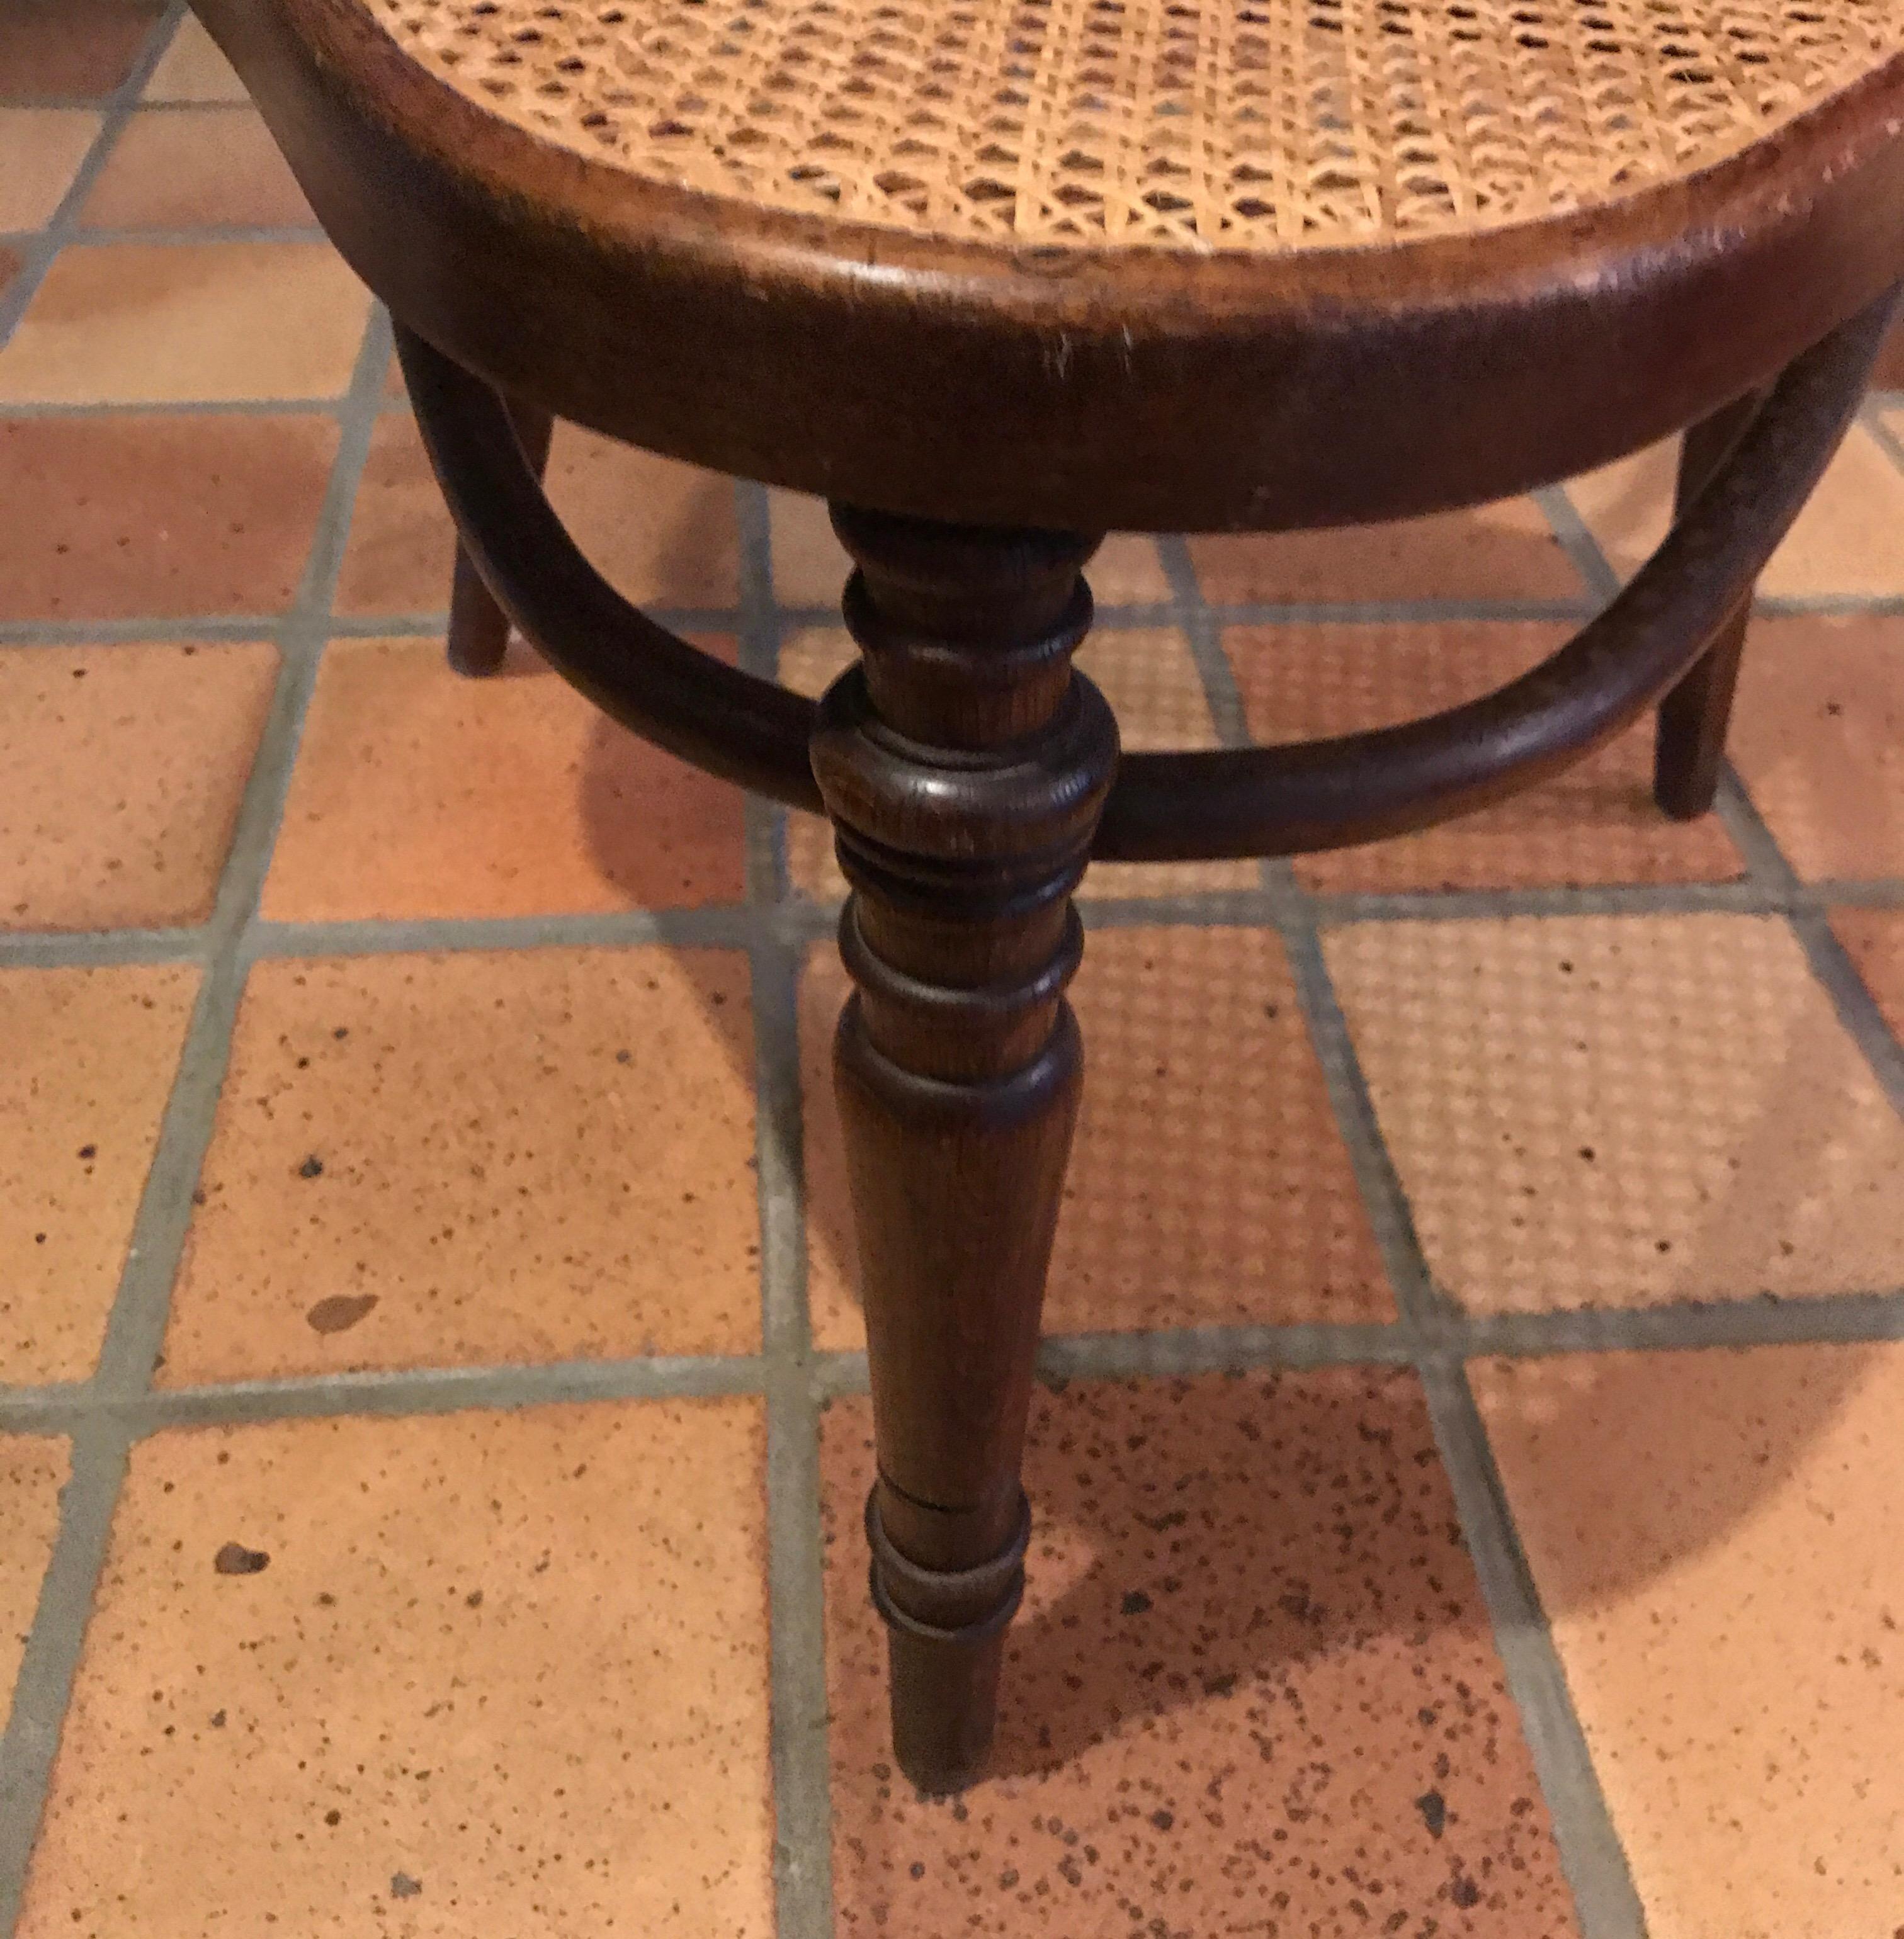 Tripod chair produced by Kohn, circa 1900.
Perfect condition new caning
Stamped and labeled.